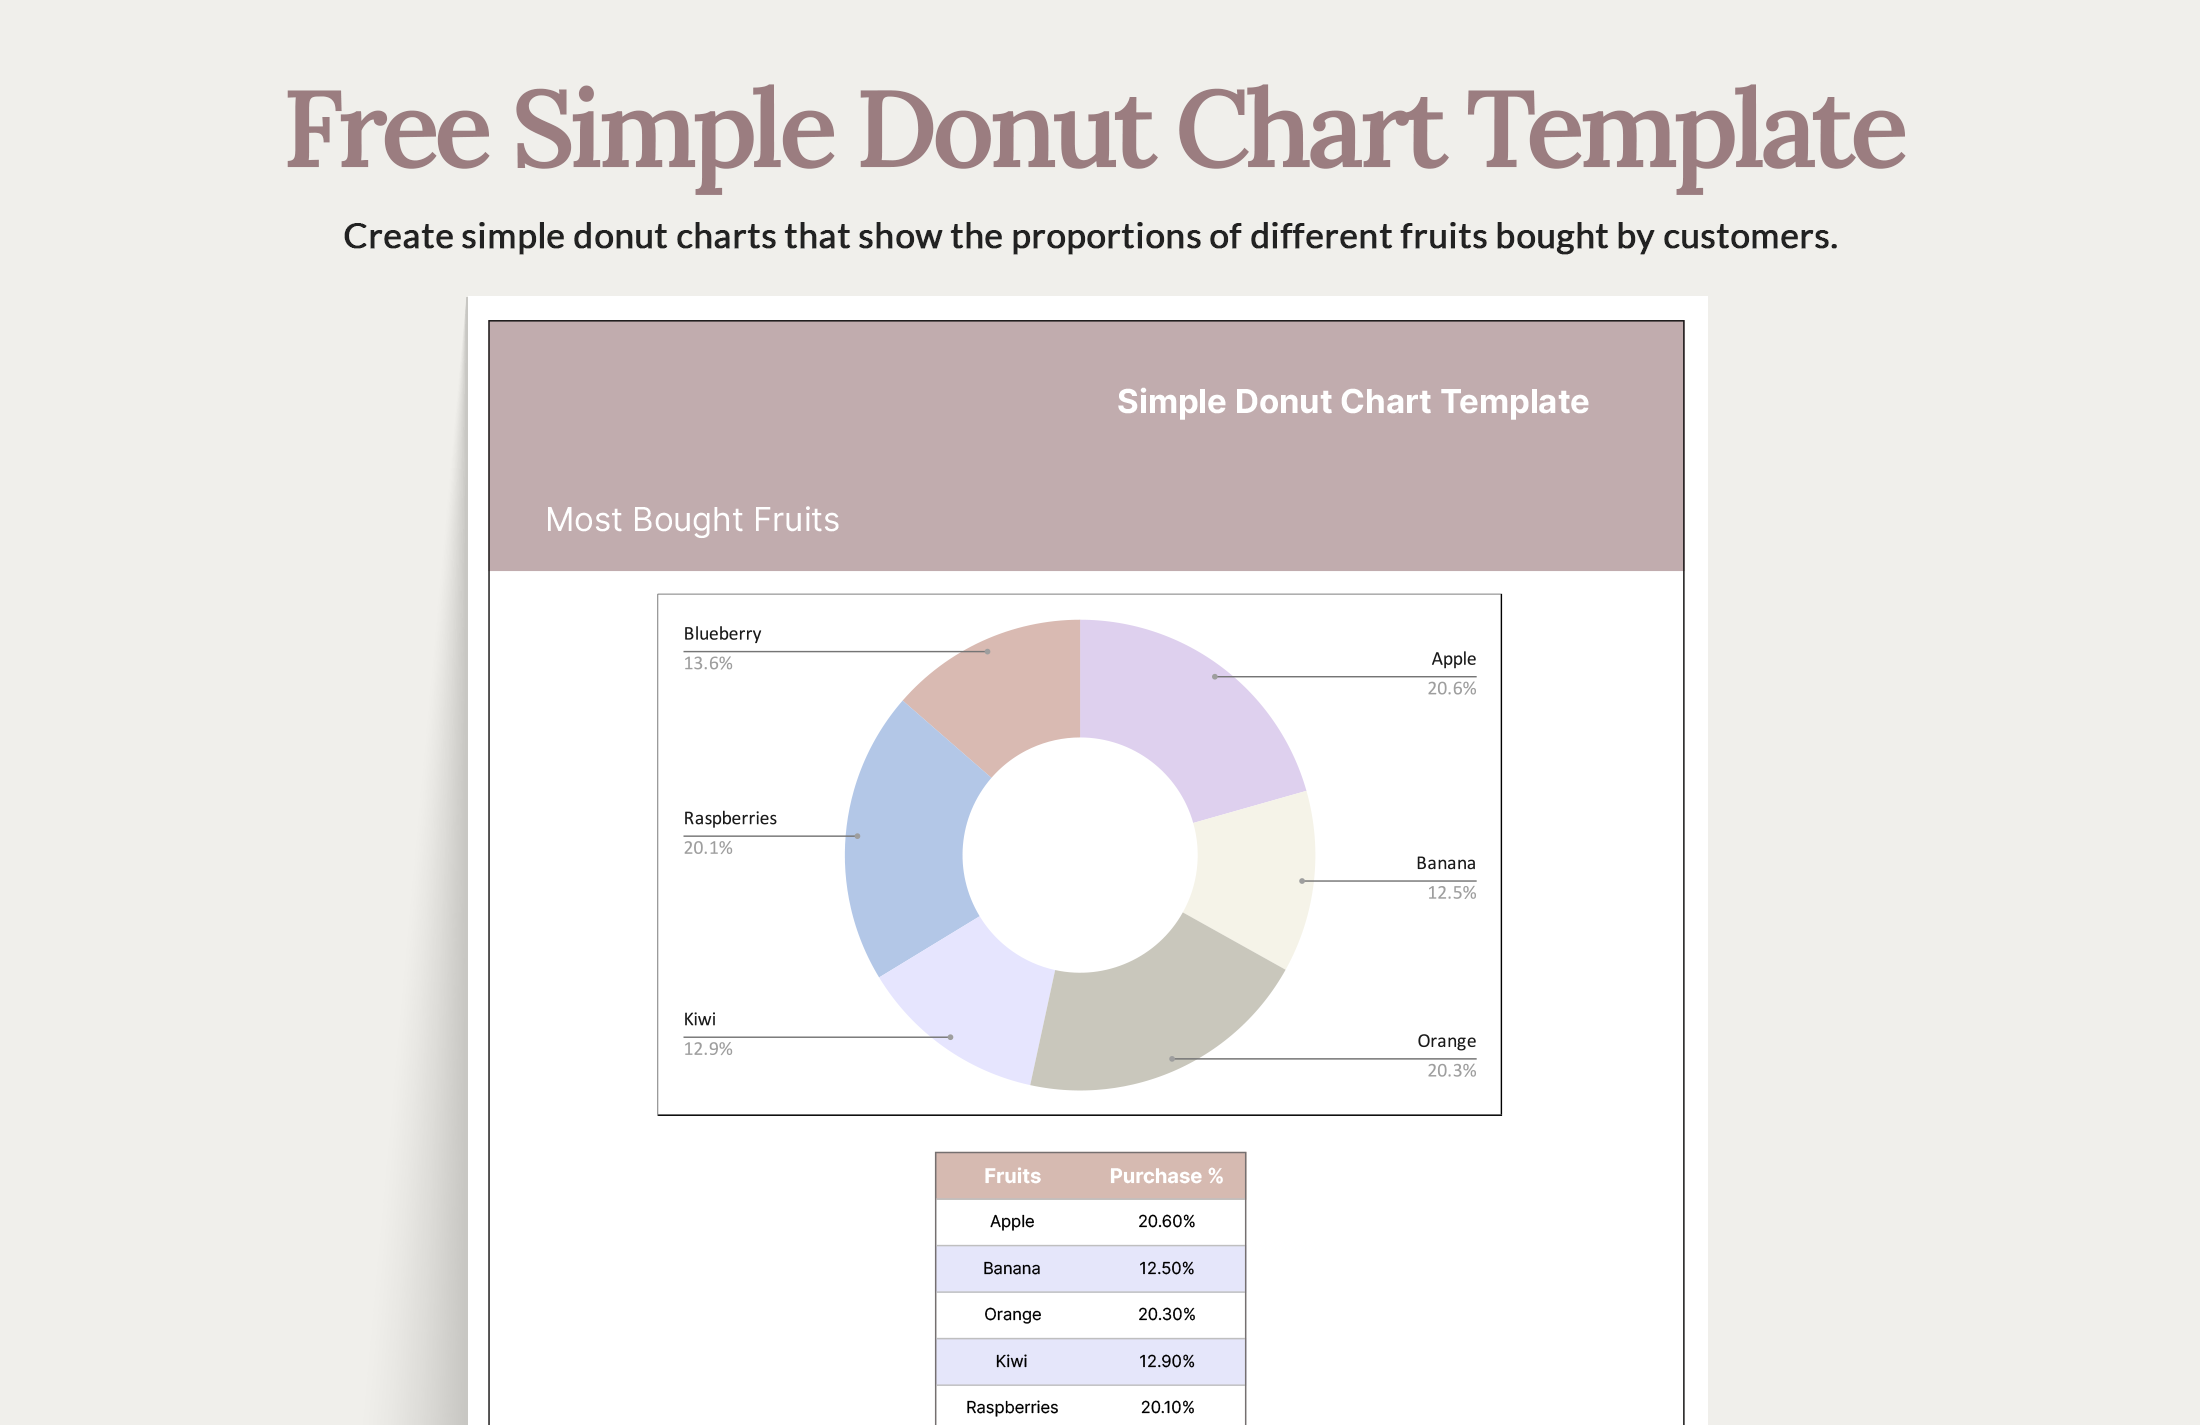 FREE Donut Chart Template Download in Excel, Google Sheets